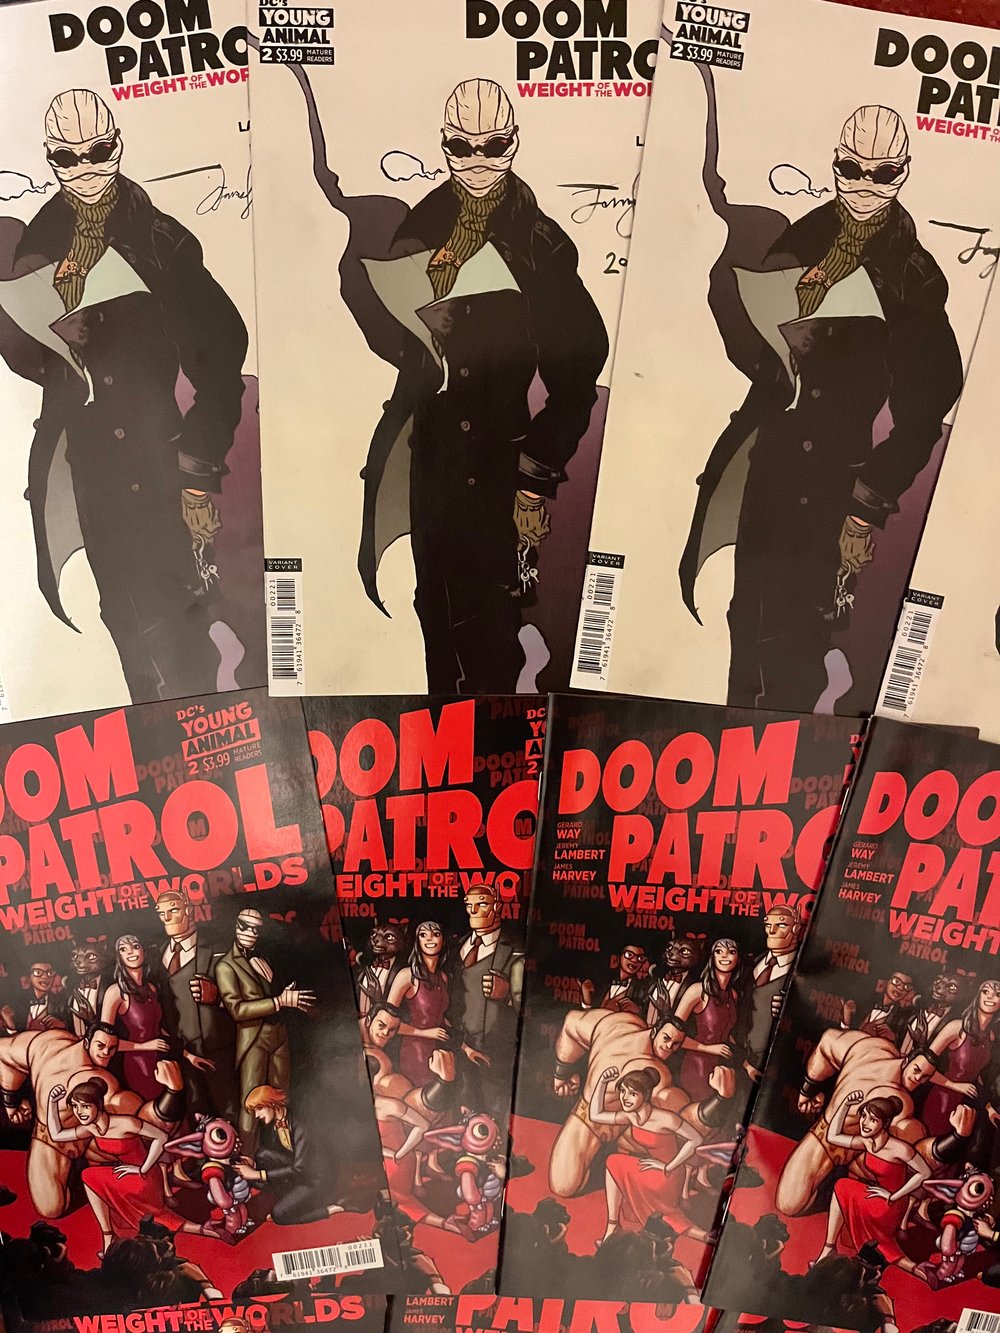 DOOM PATROL: WEIGHT OF THE WORLDS #2 (Signed)